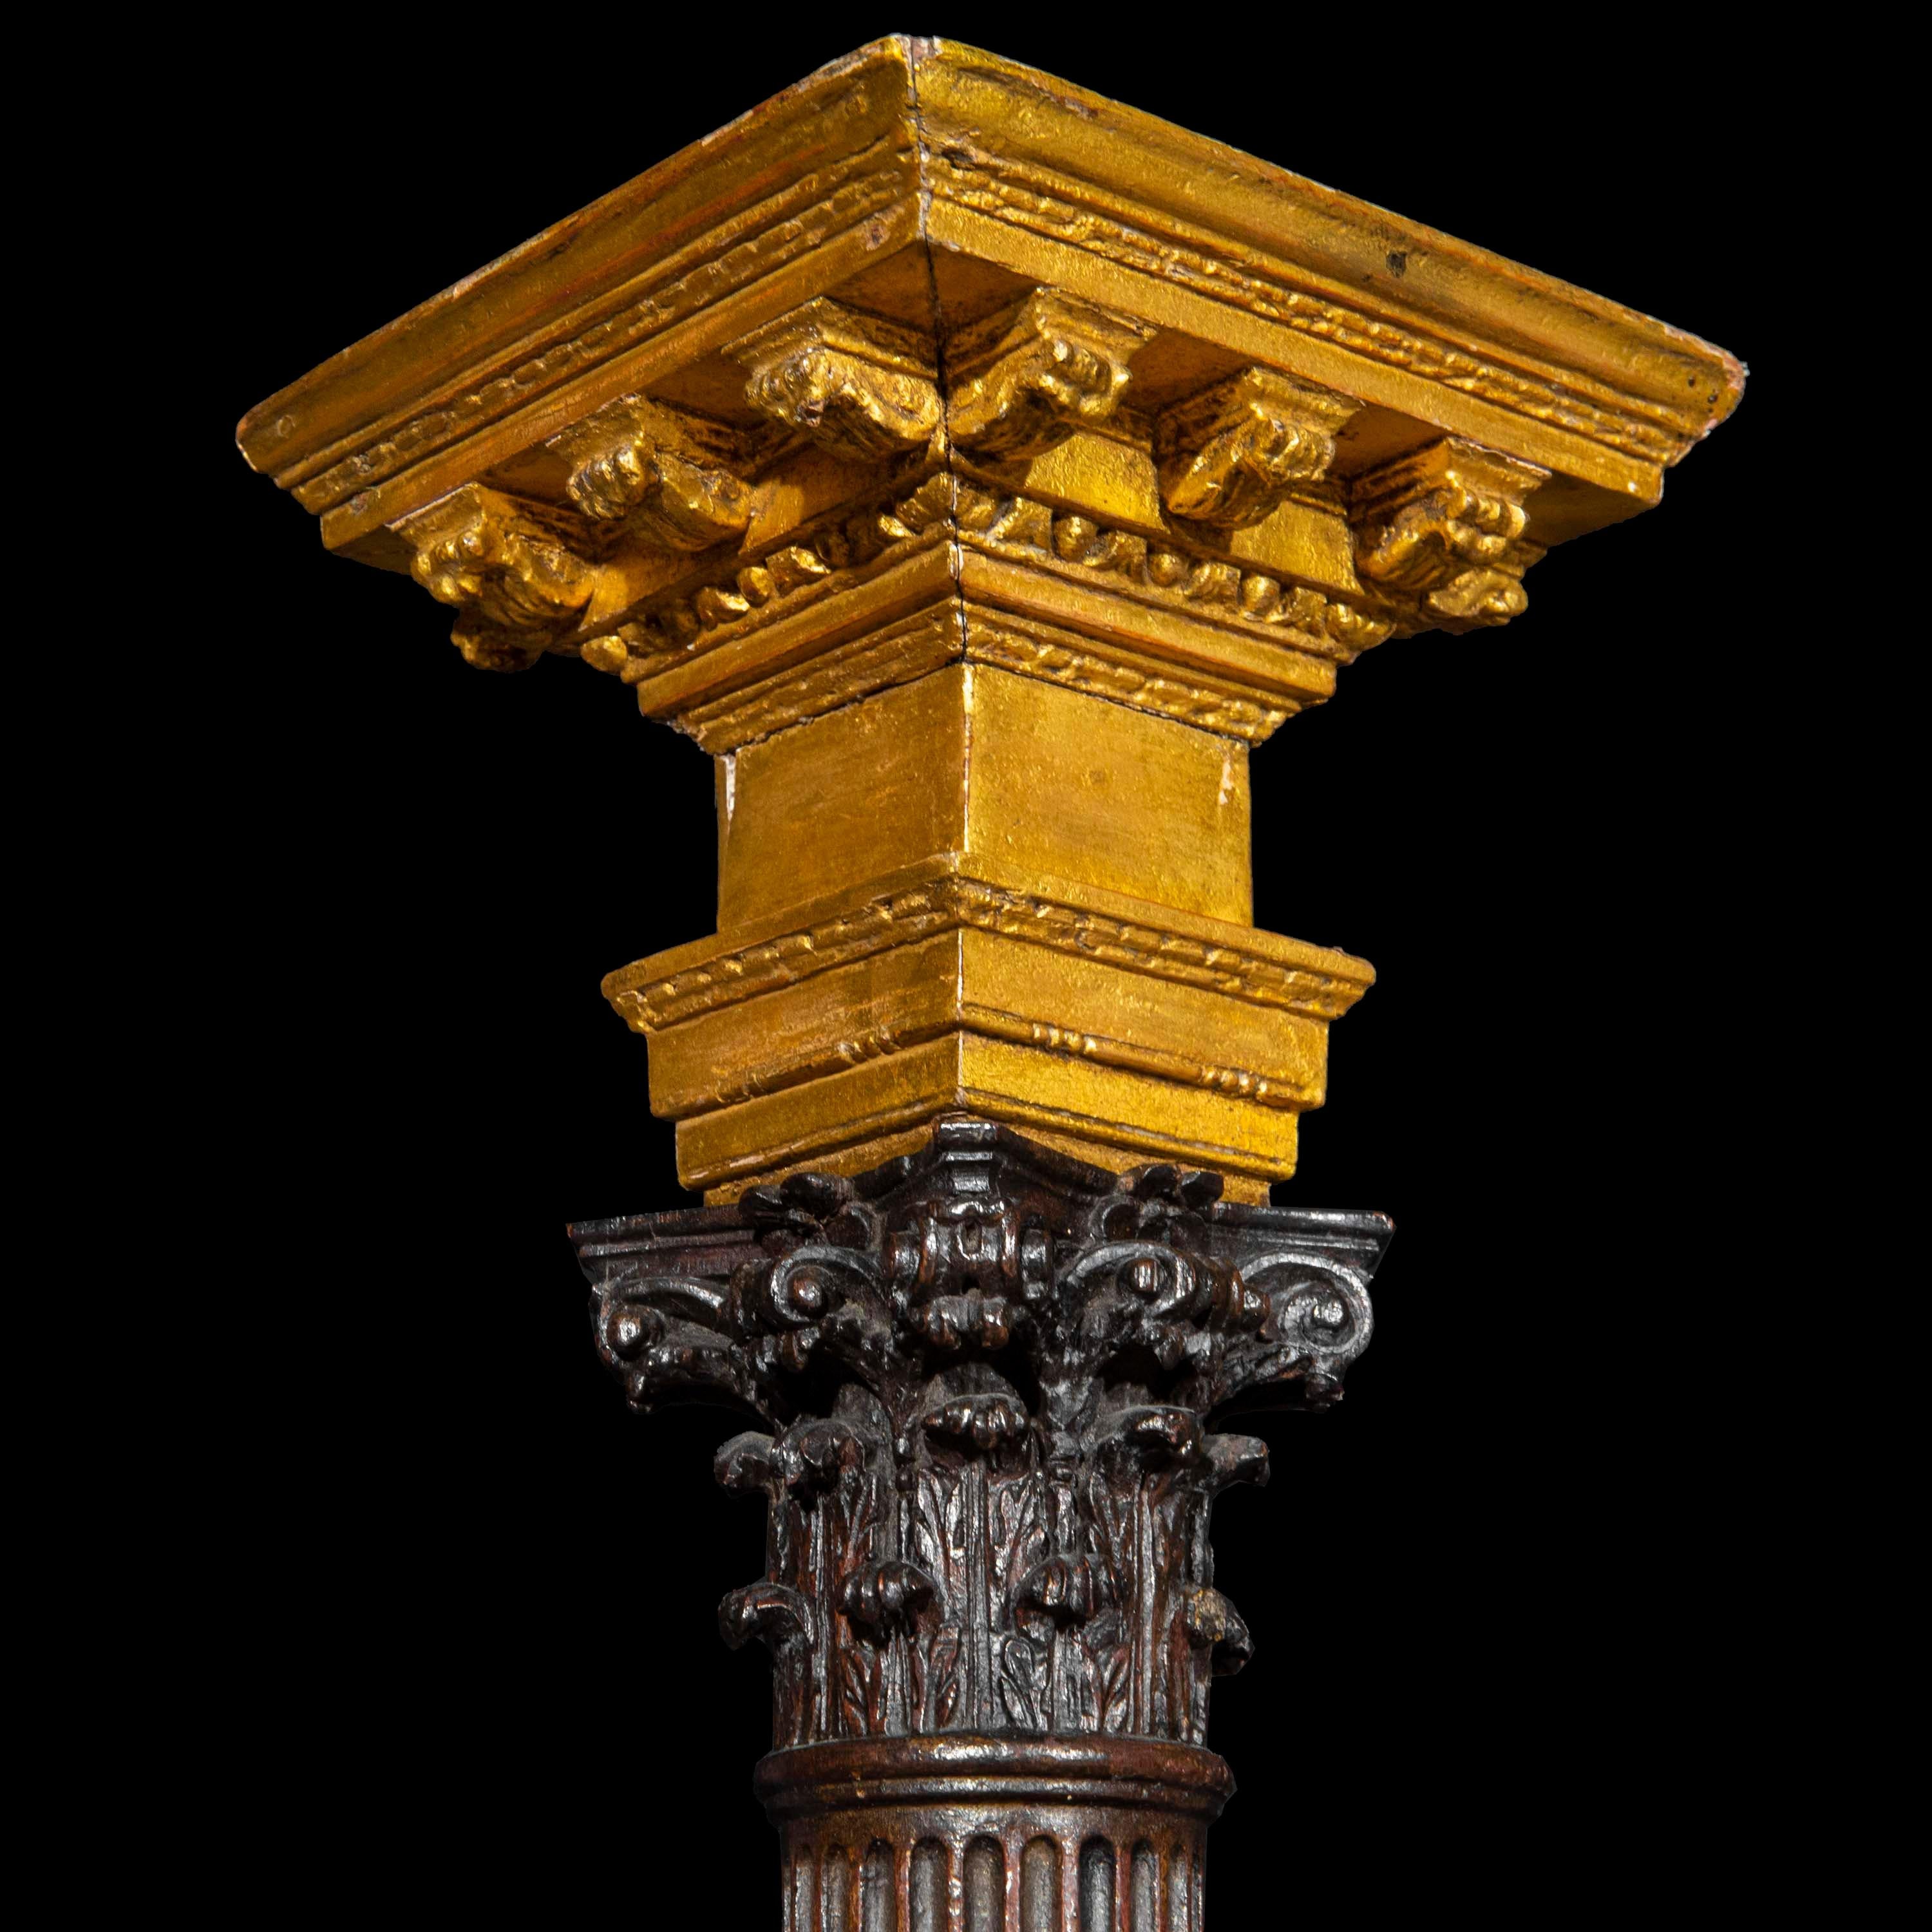 An extremely rare, exquisite Grand Tour-inspired architectural model of a Corinthian column. England, third quarter of 18th century.

Why we like it
Exquisitely carved and having accents picked out in gold, this extremely rare survival from the